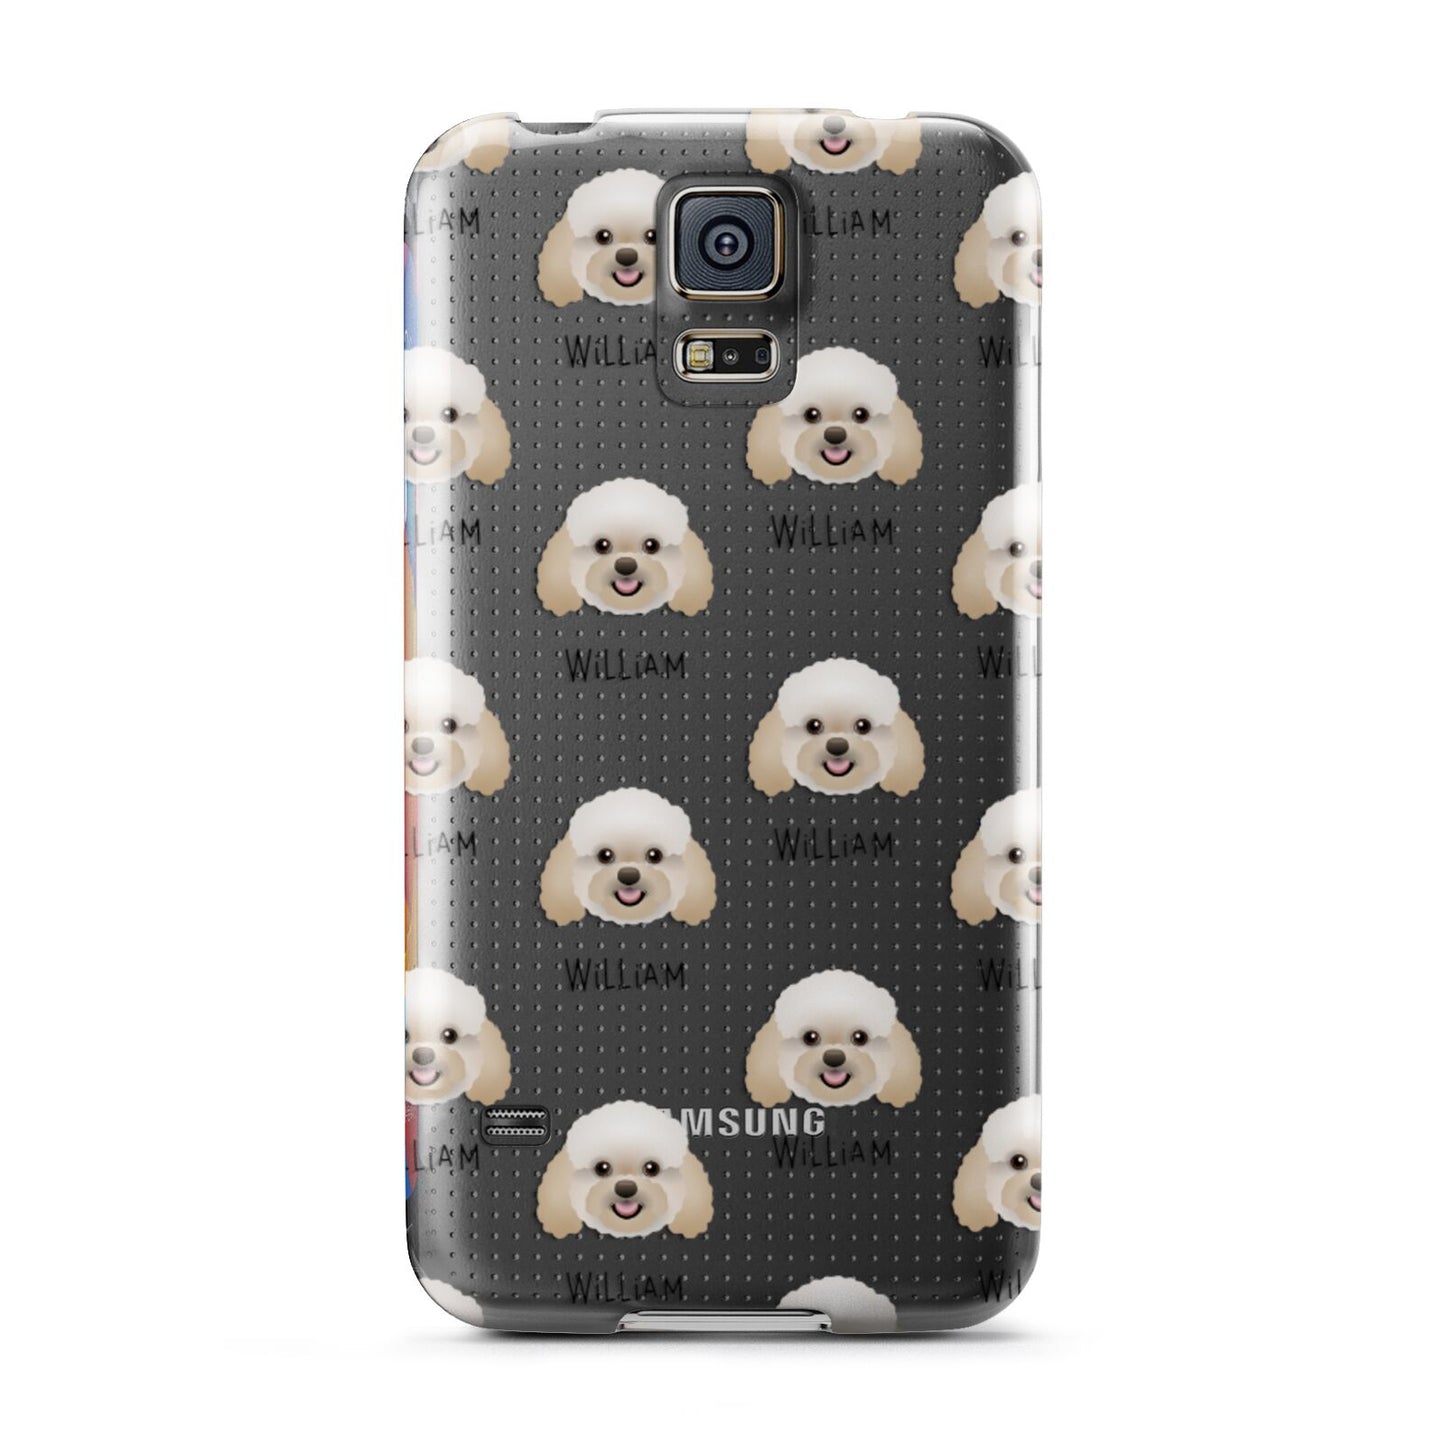 Bich poo Icon with Name Samsung Galaxy S5 Case